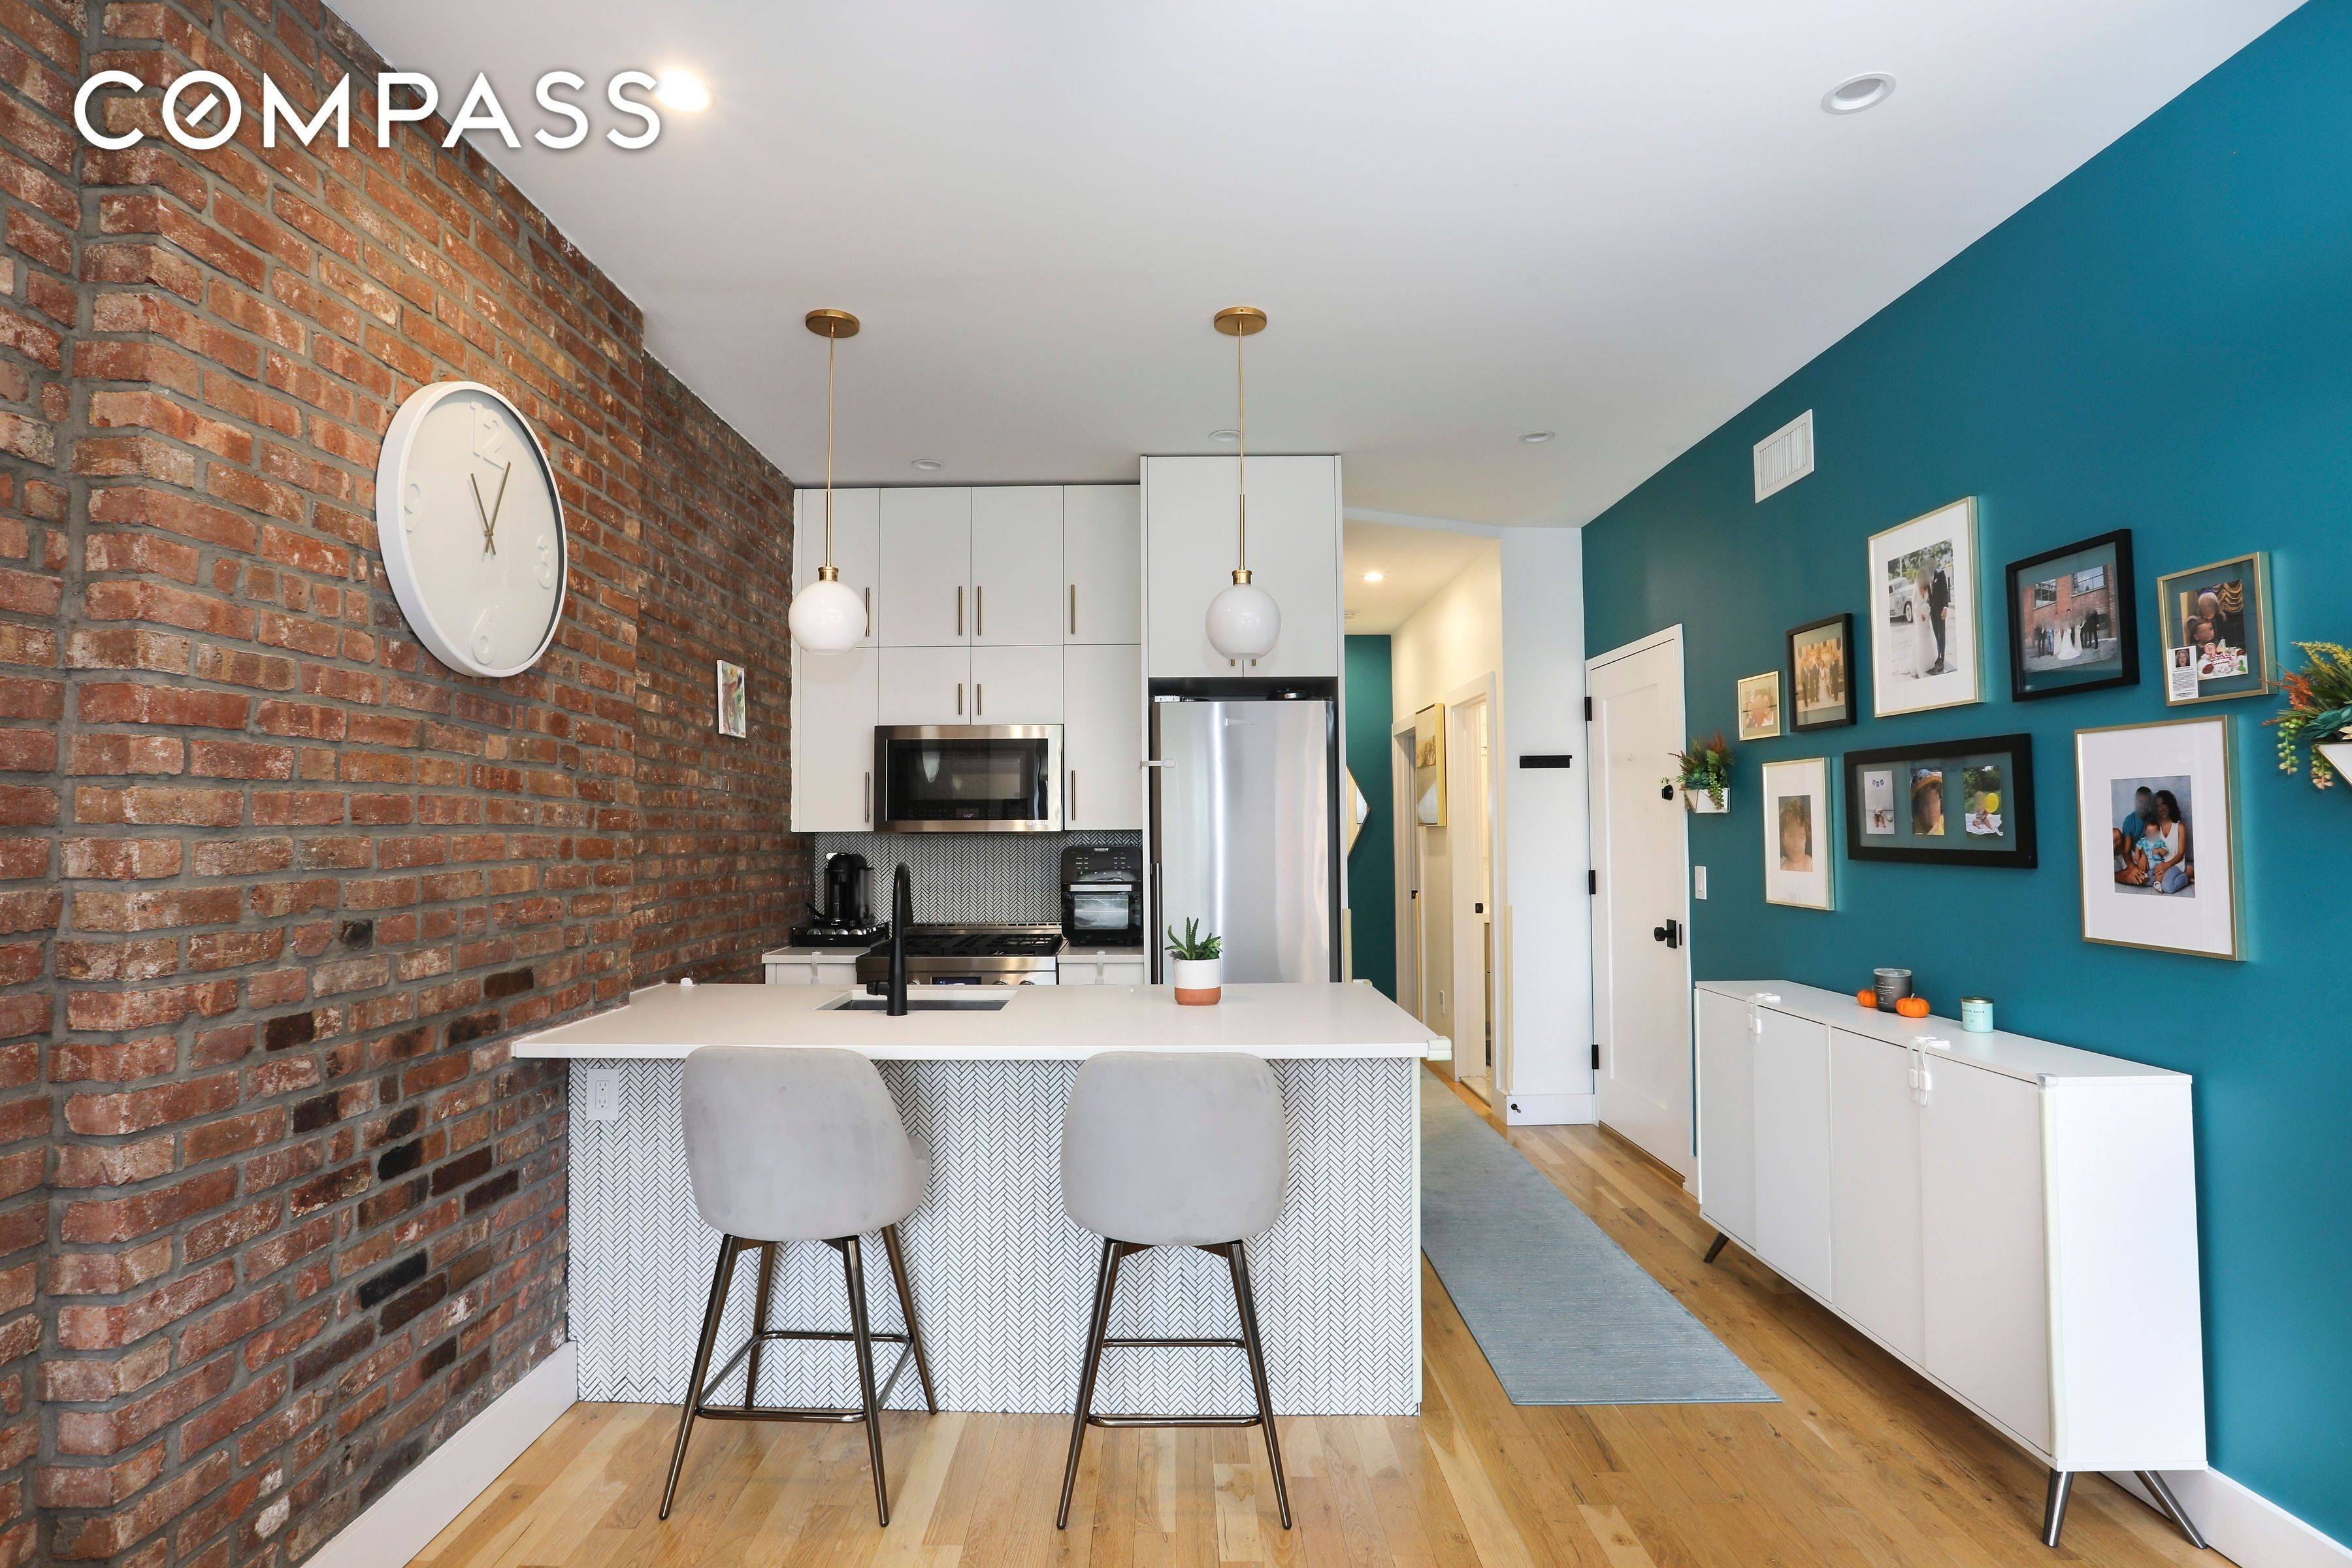 Converted in 2018, this newly built condo embodies aspects of traditional brownstone living with a modern aesthetic.